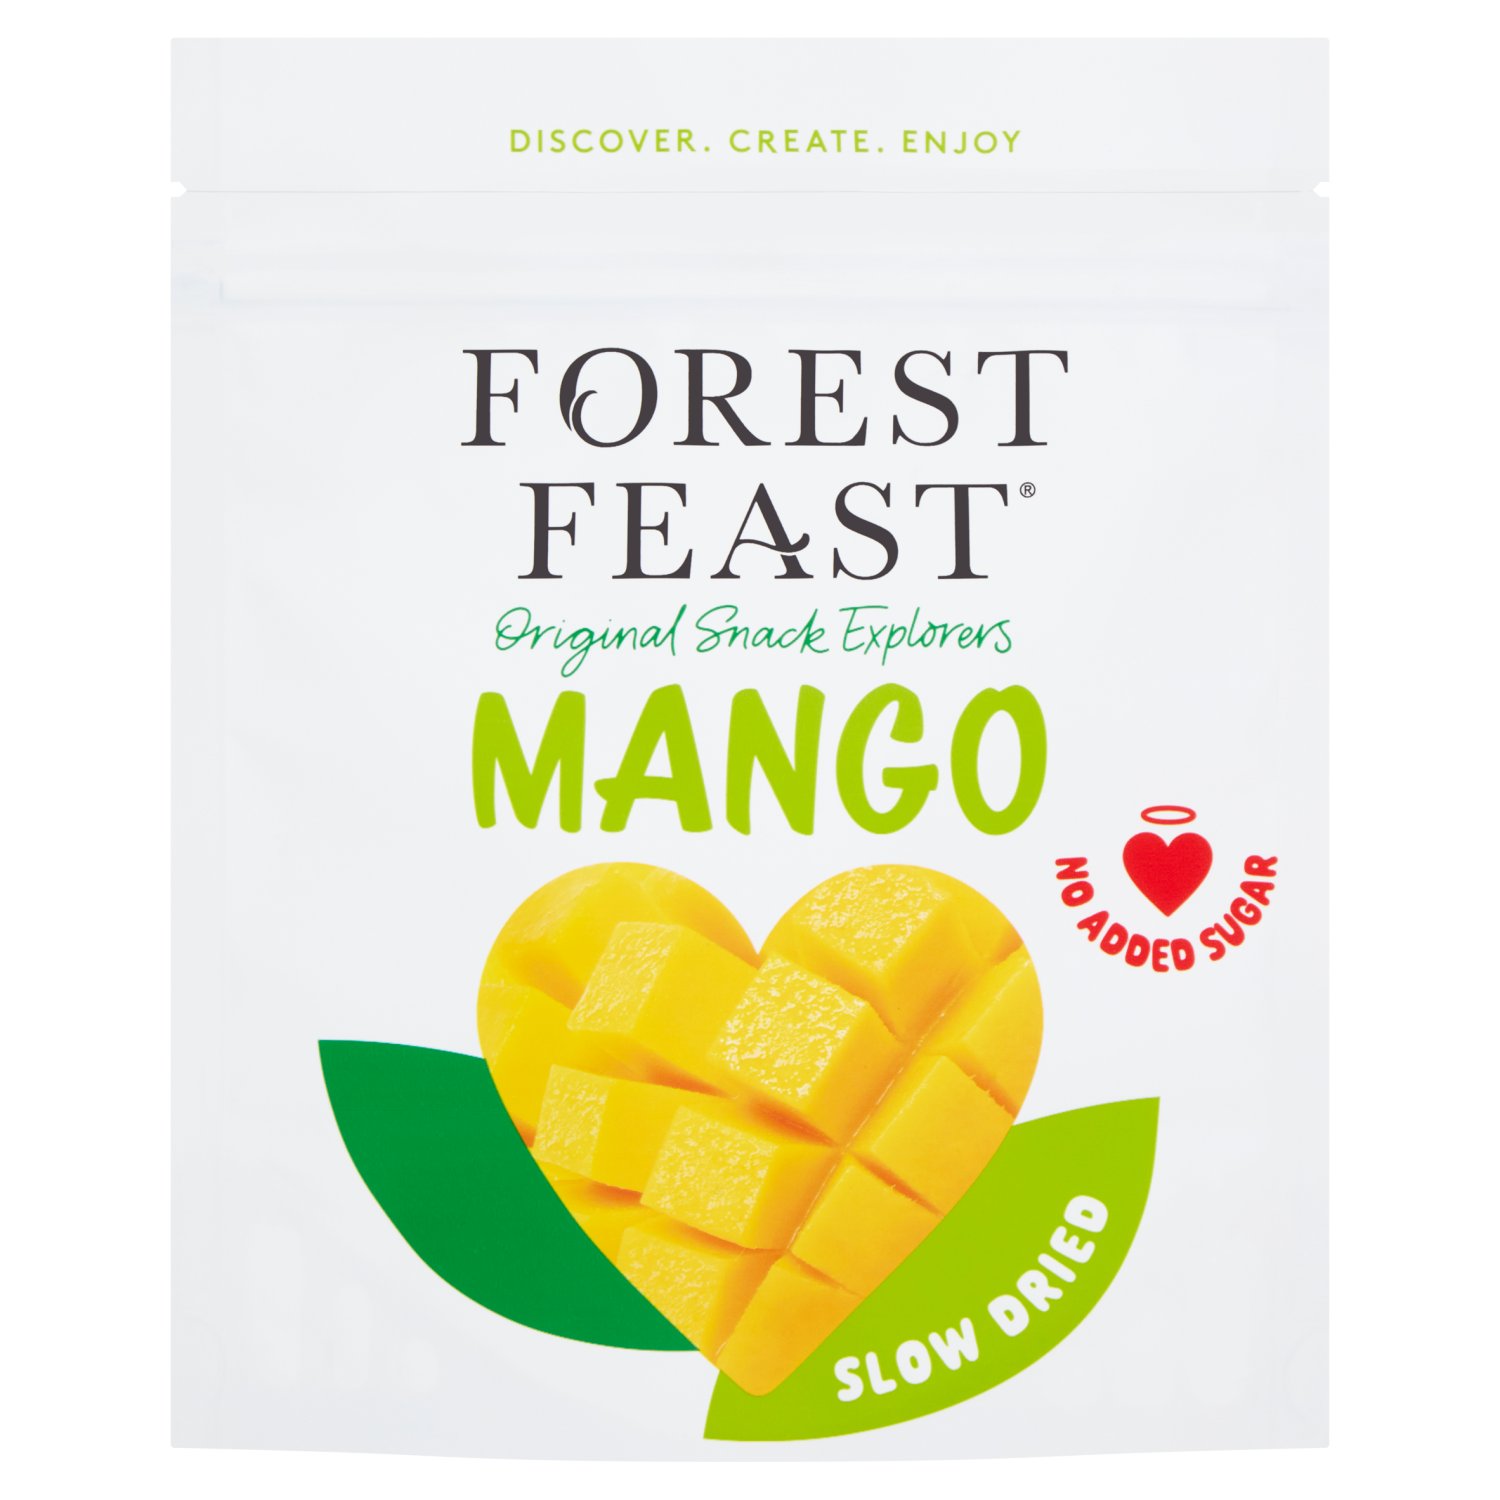 Our Mango is specially selected, picked only when fully ripe, and gently dried to lock in all its natural sweetness.